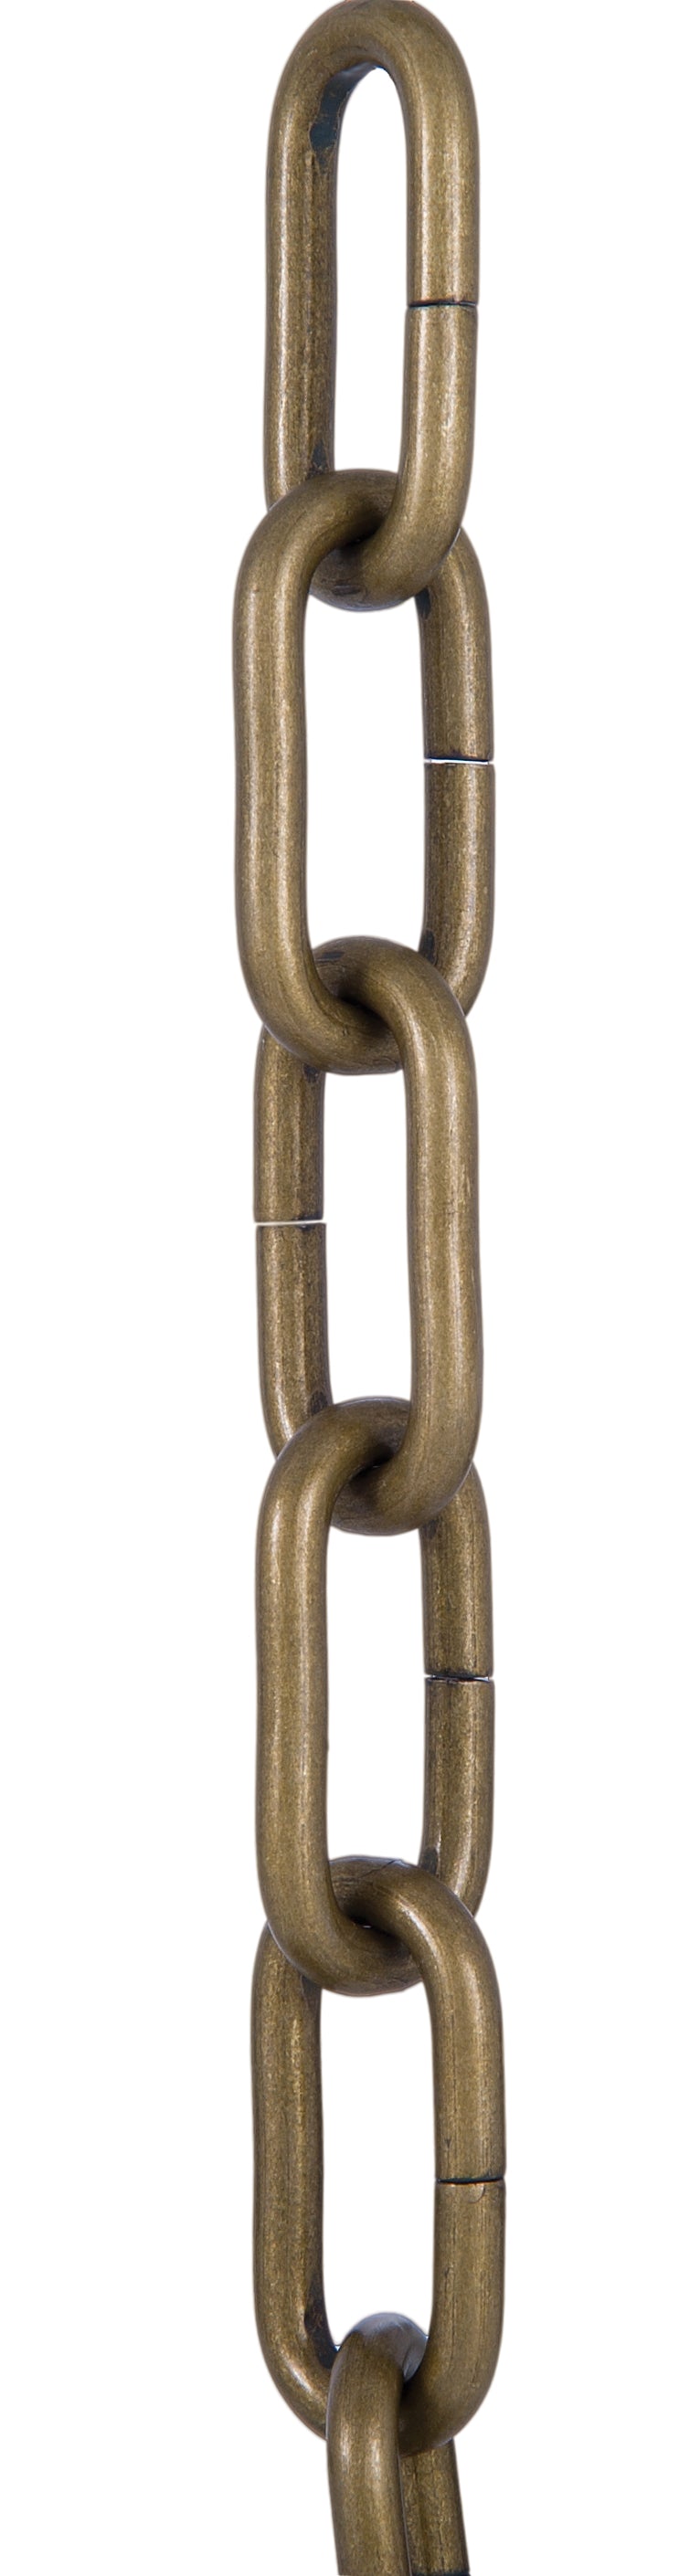 13 Gauge (1/16in.) Thick Gothic Lamp Chain - Brass Plated Finish